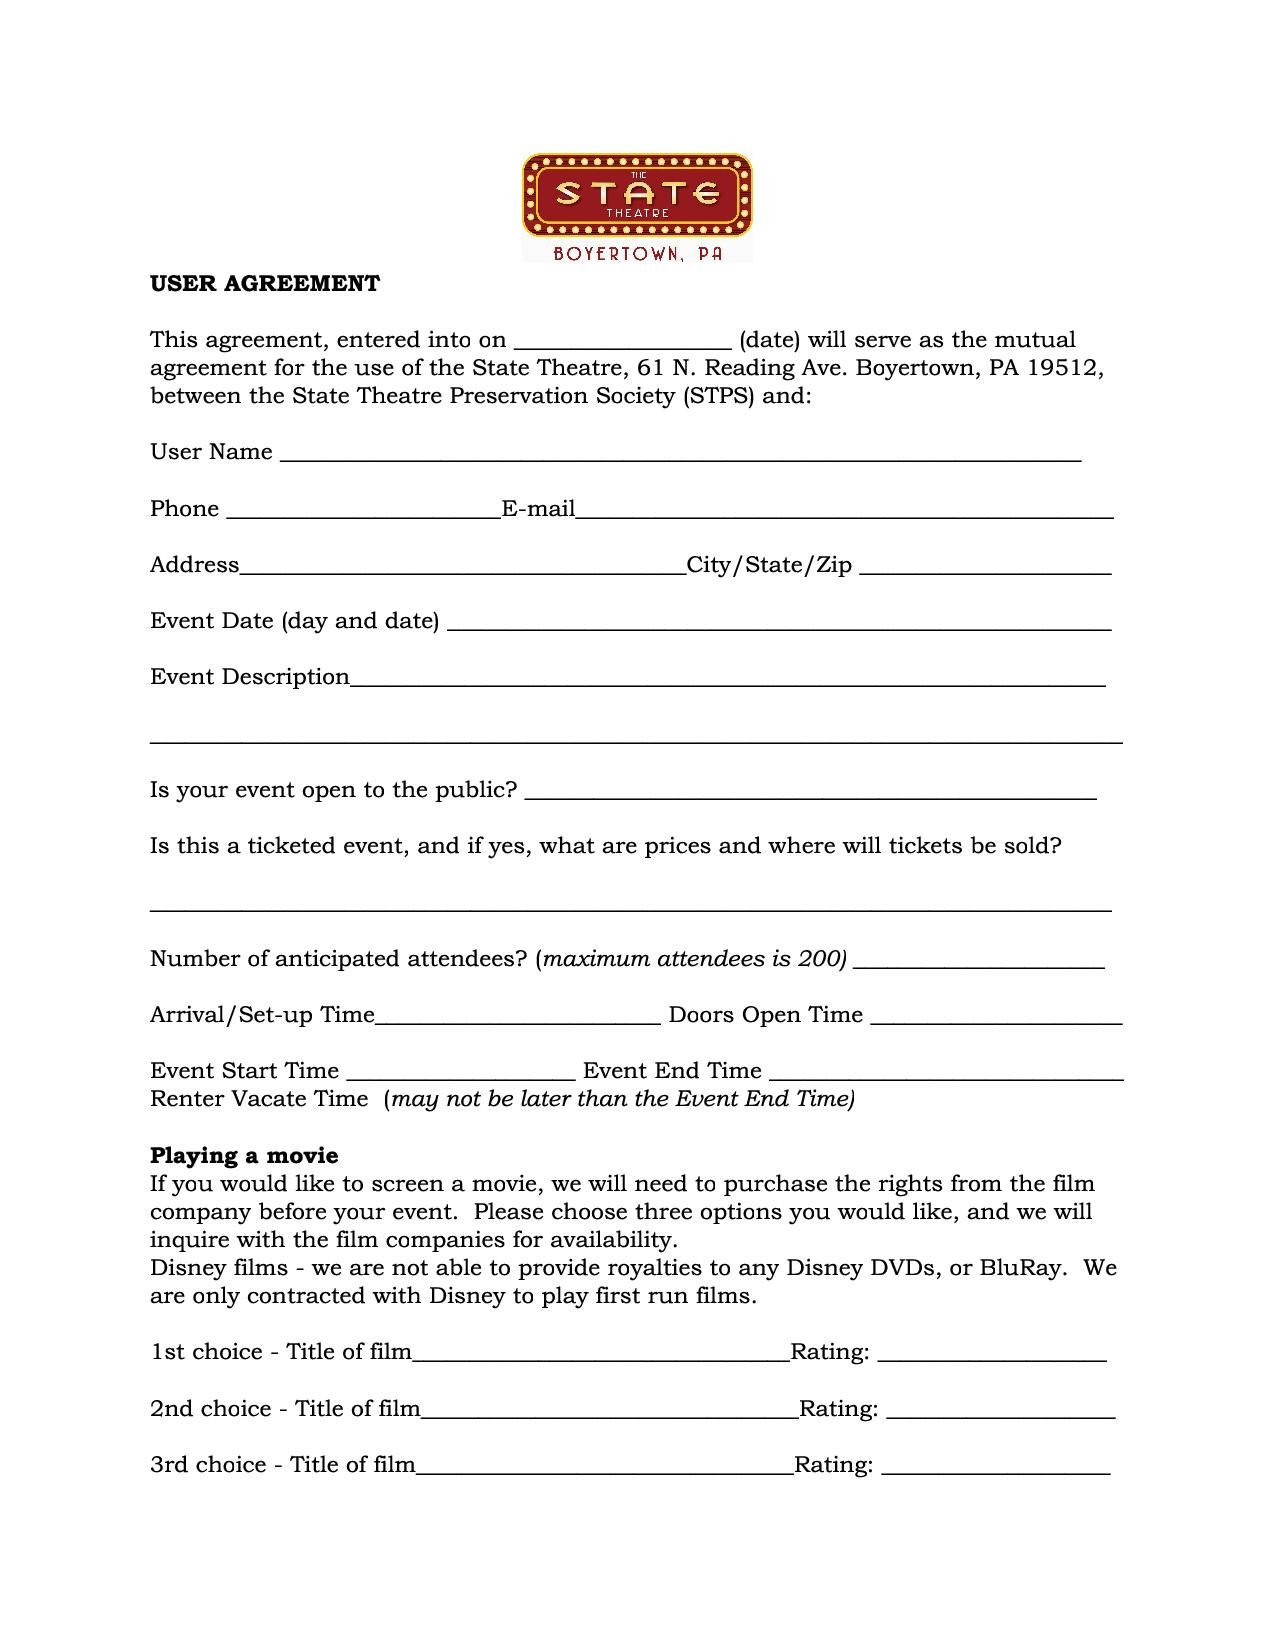 User Agreement Template User Agreement Boyertown State Theatre